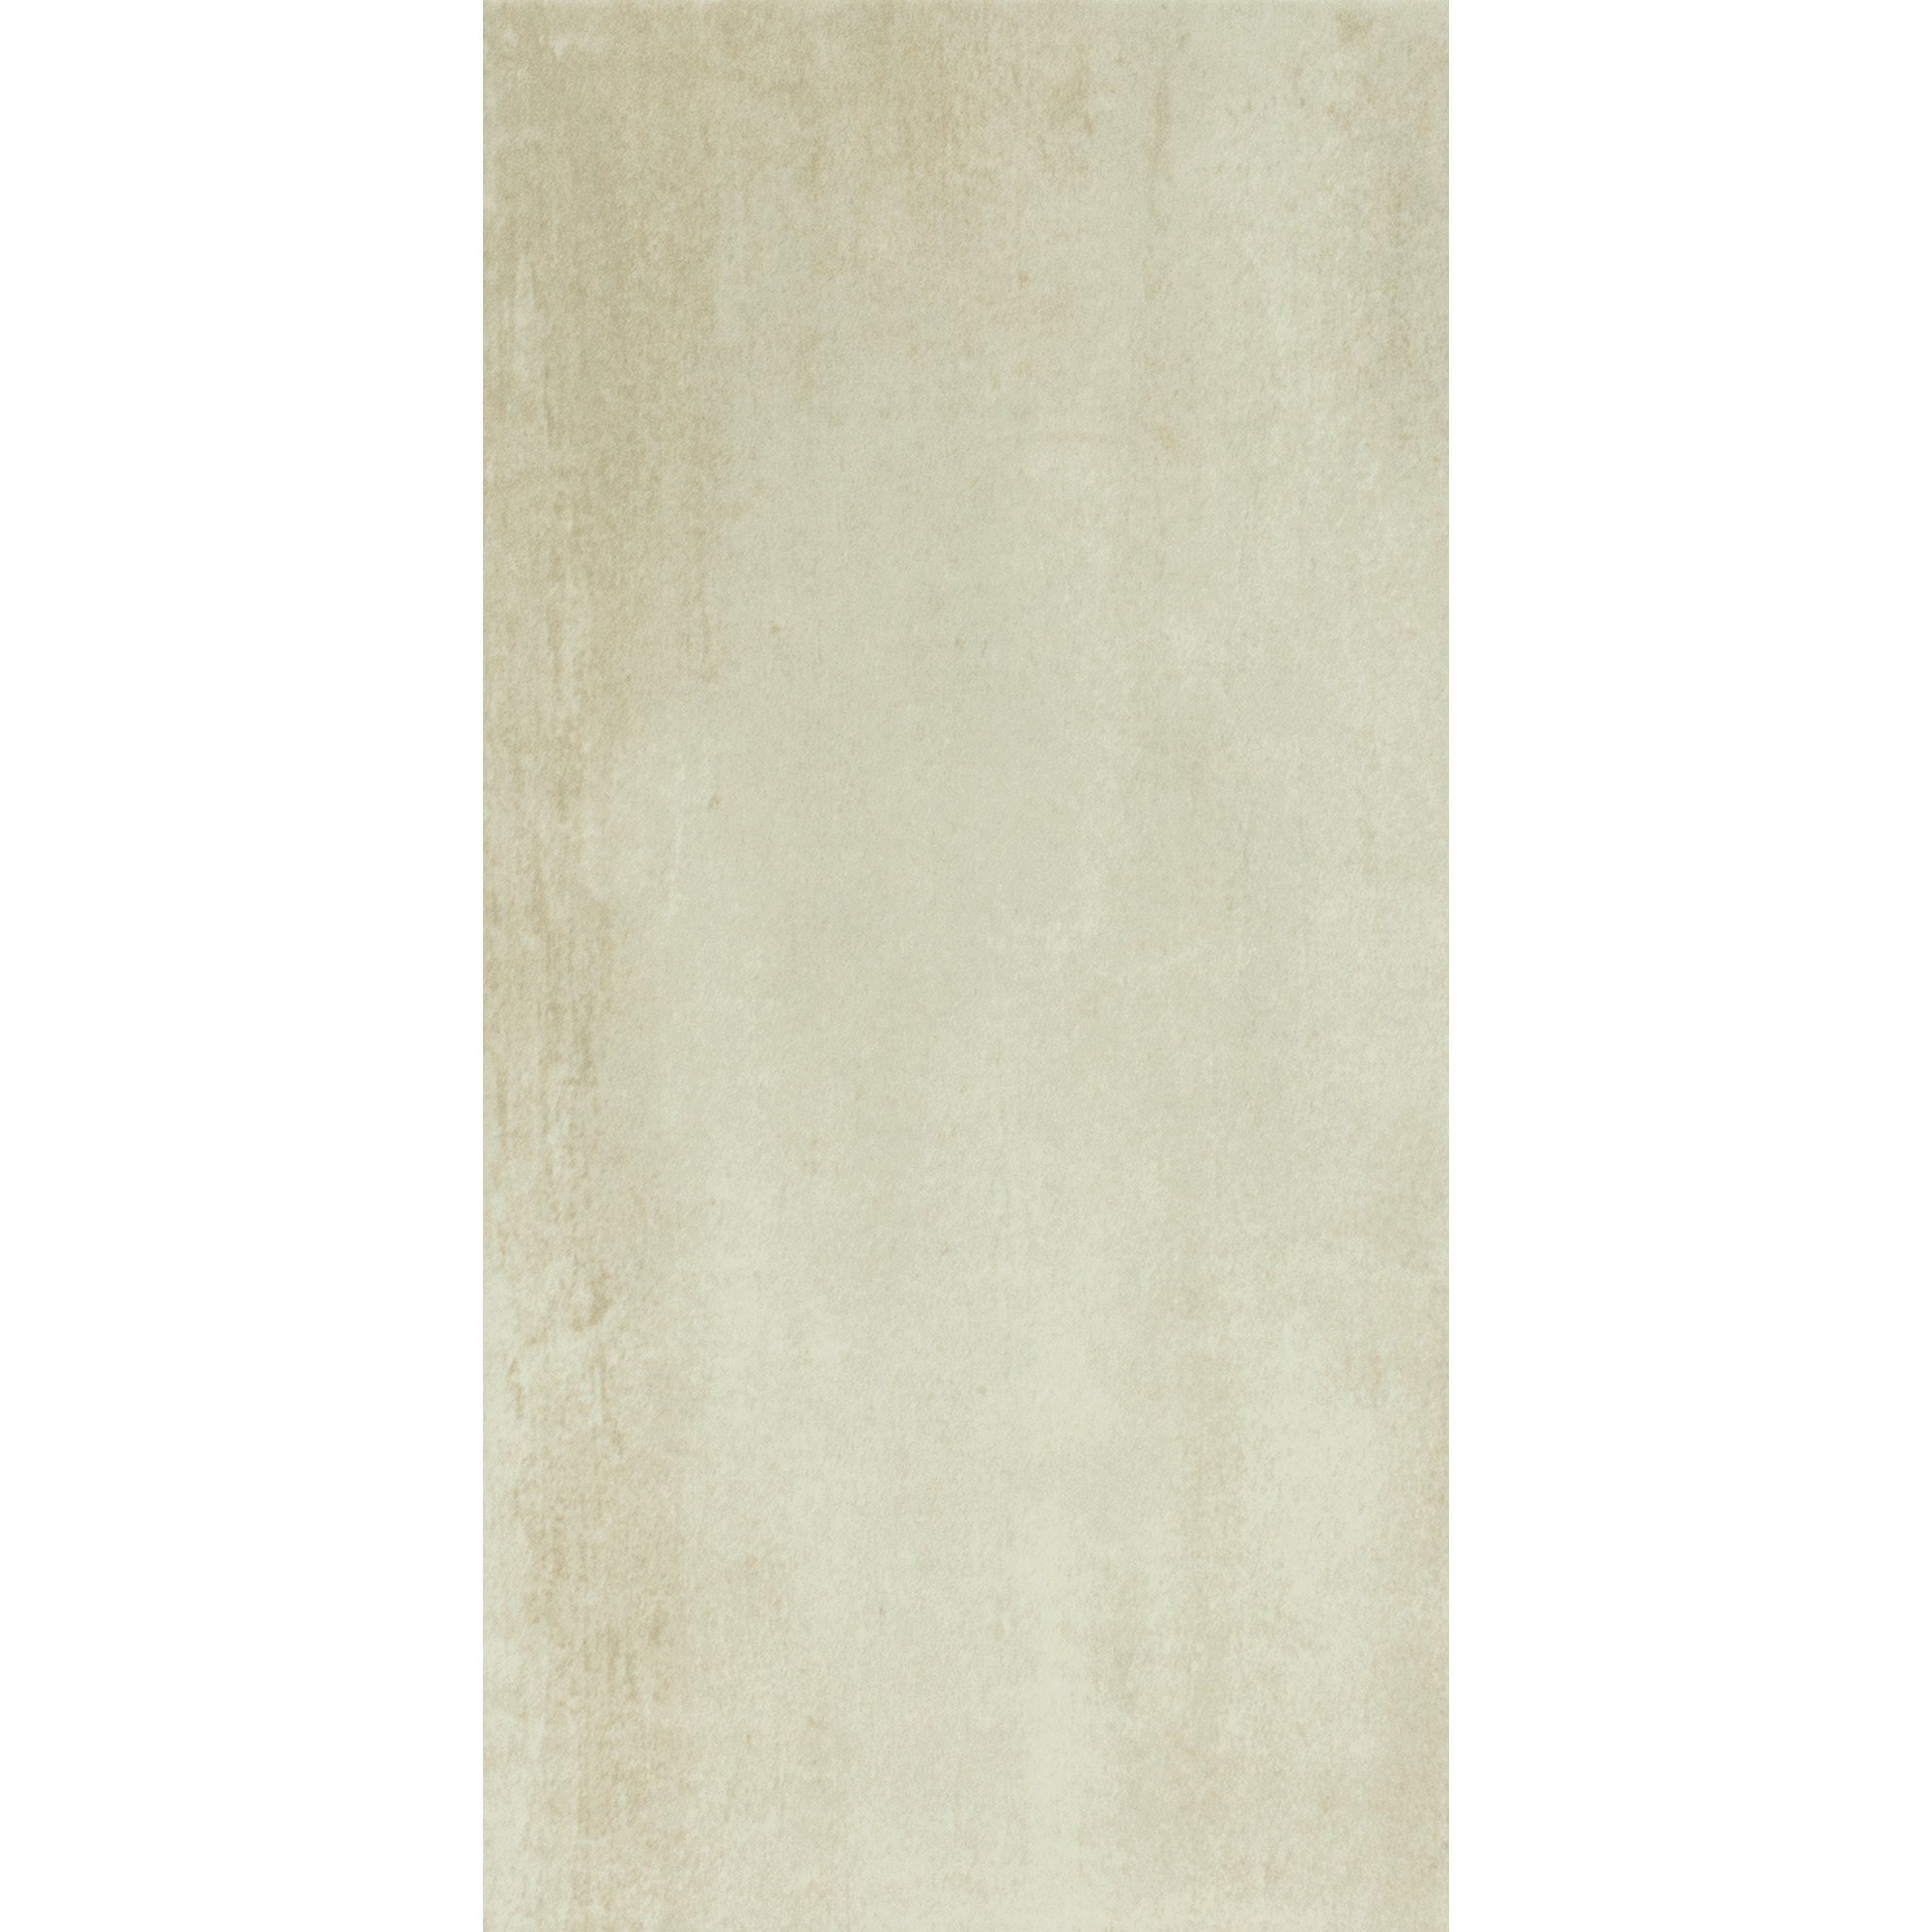 Bodenfliese 'Star' beige 30,5 x 61 cm + product picture